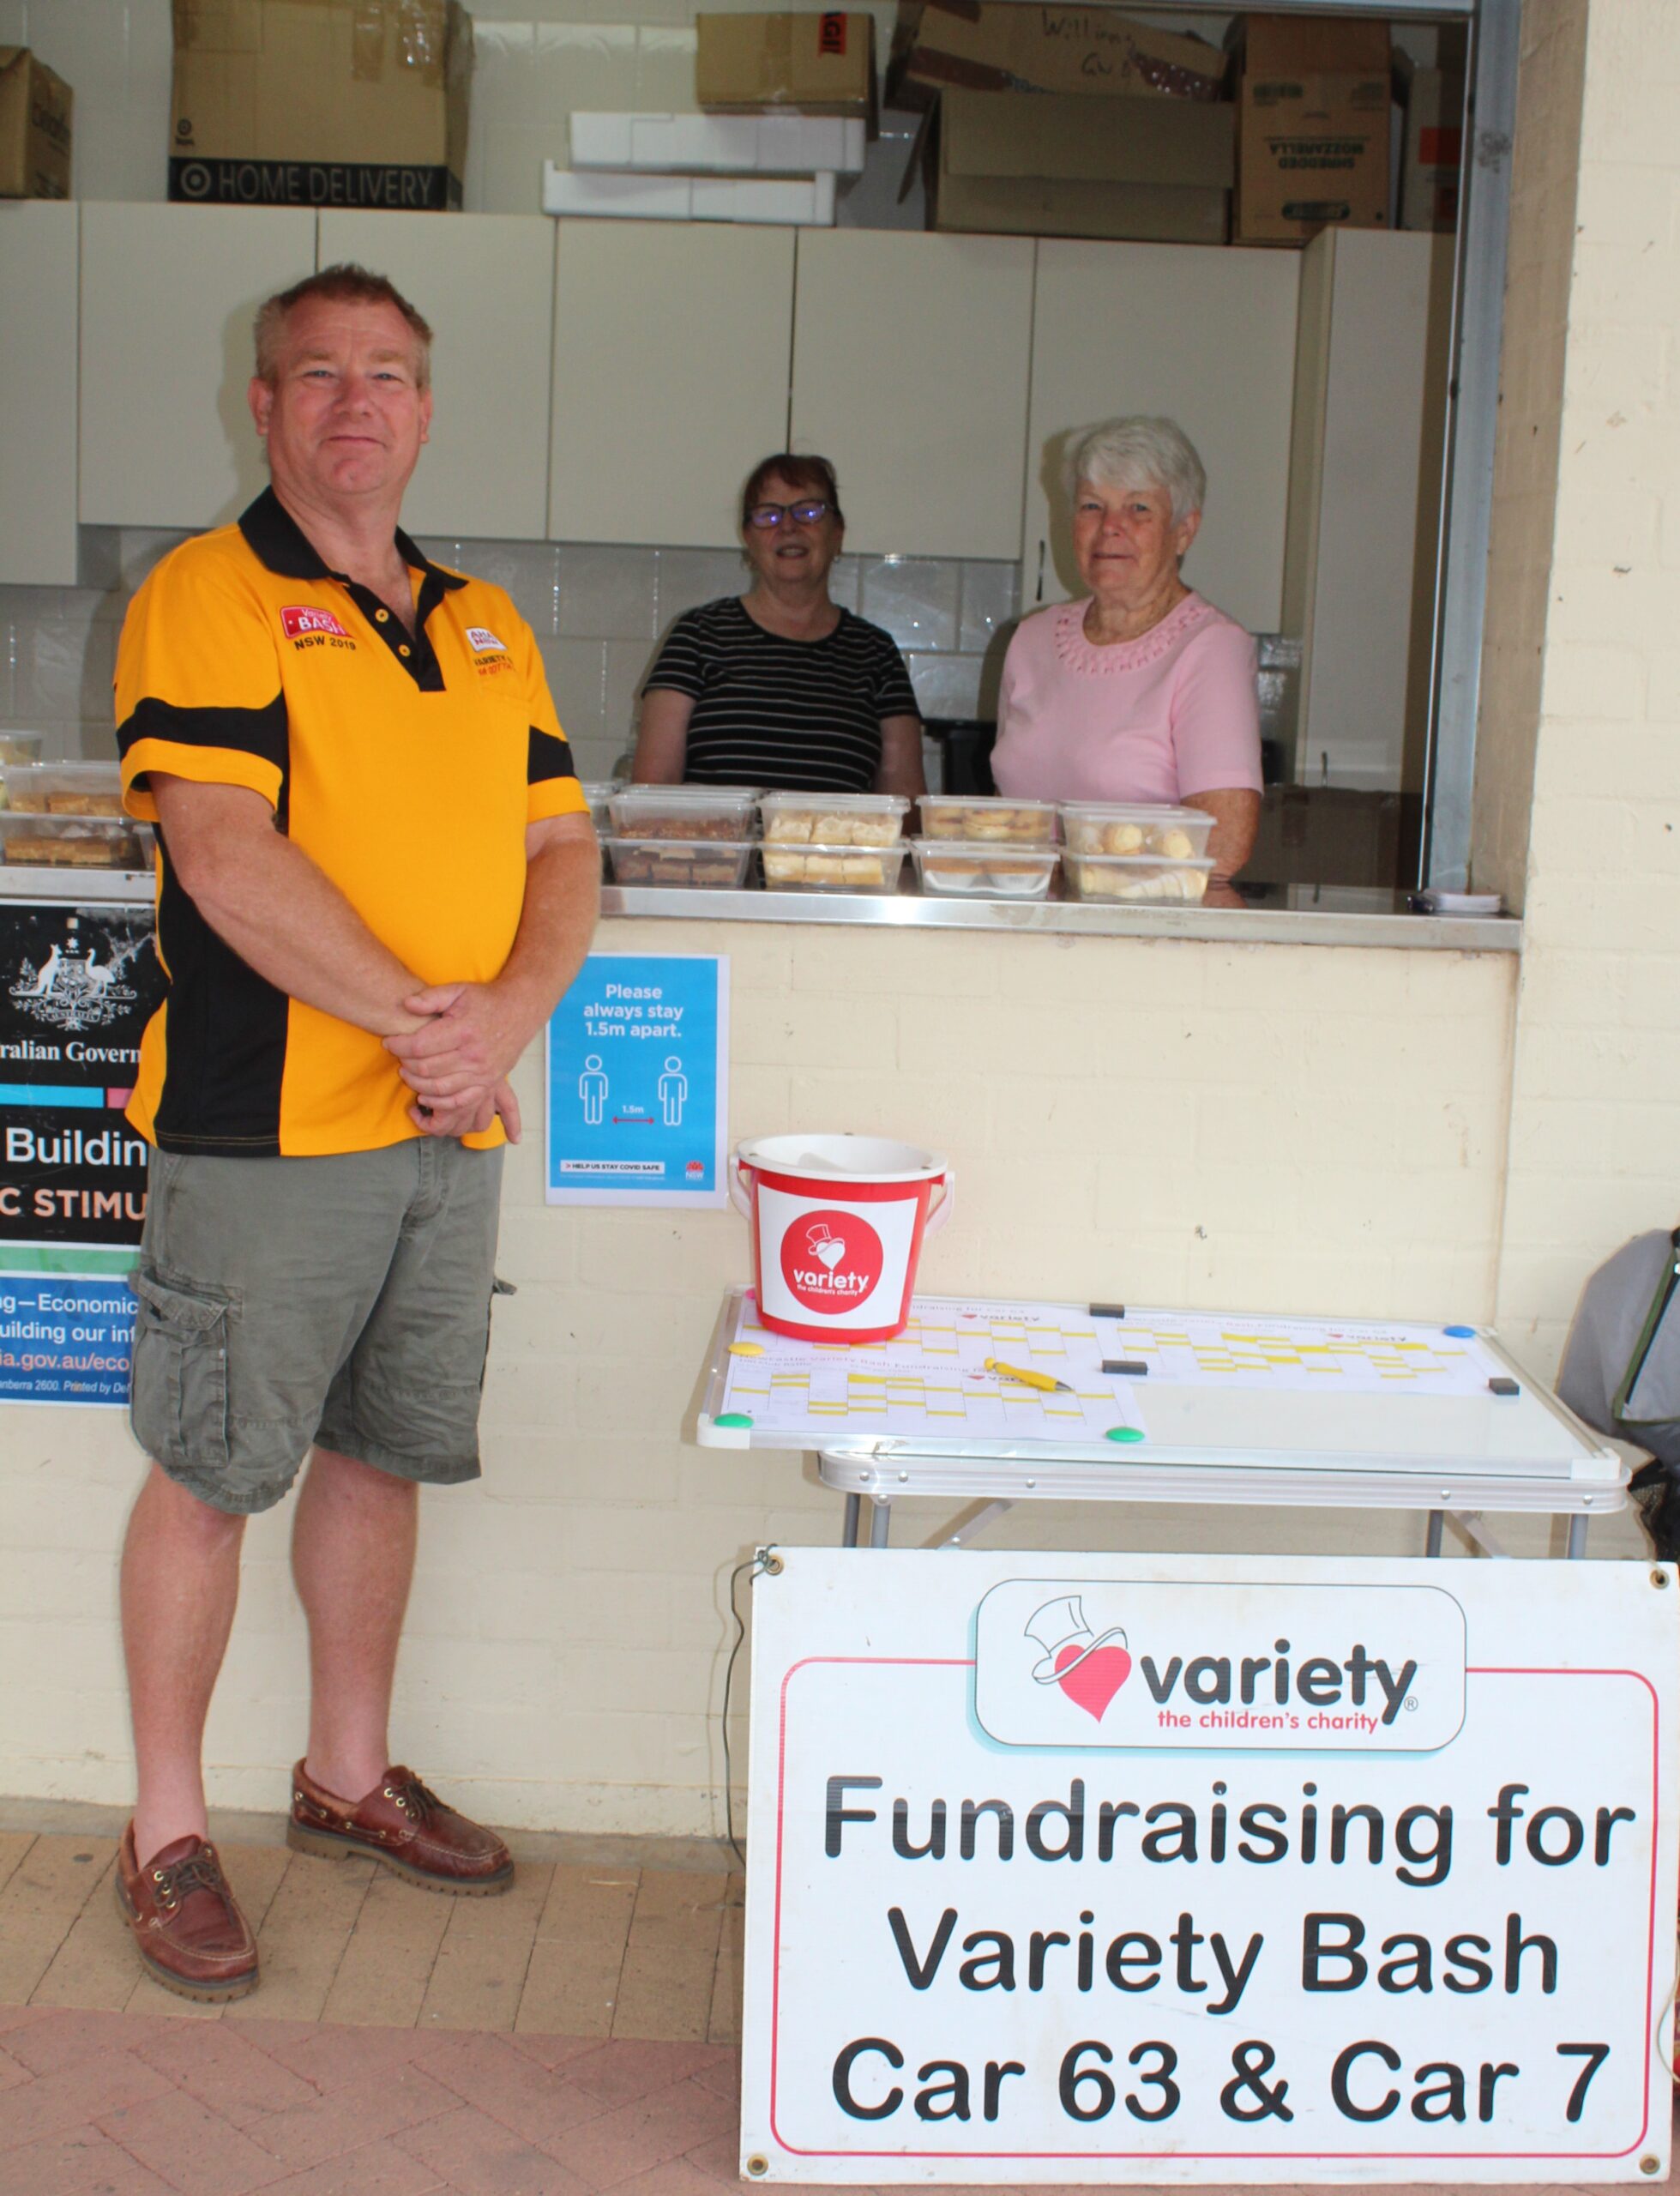 Stuart and Tracey host cake stall fundraiser for children in need